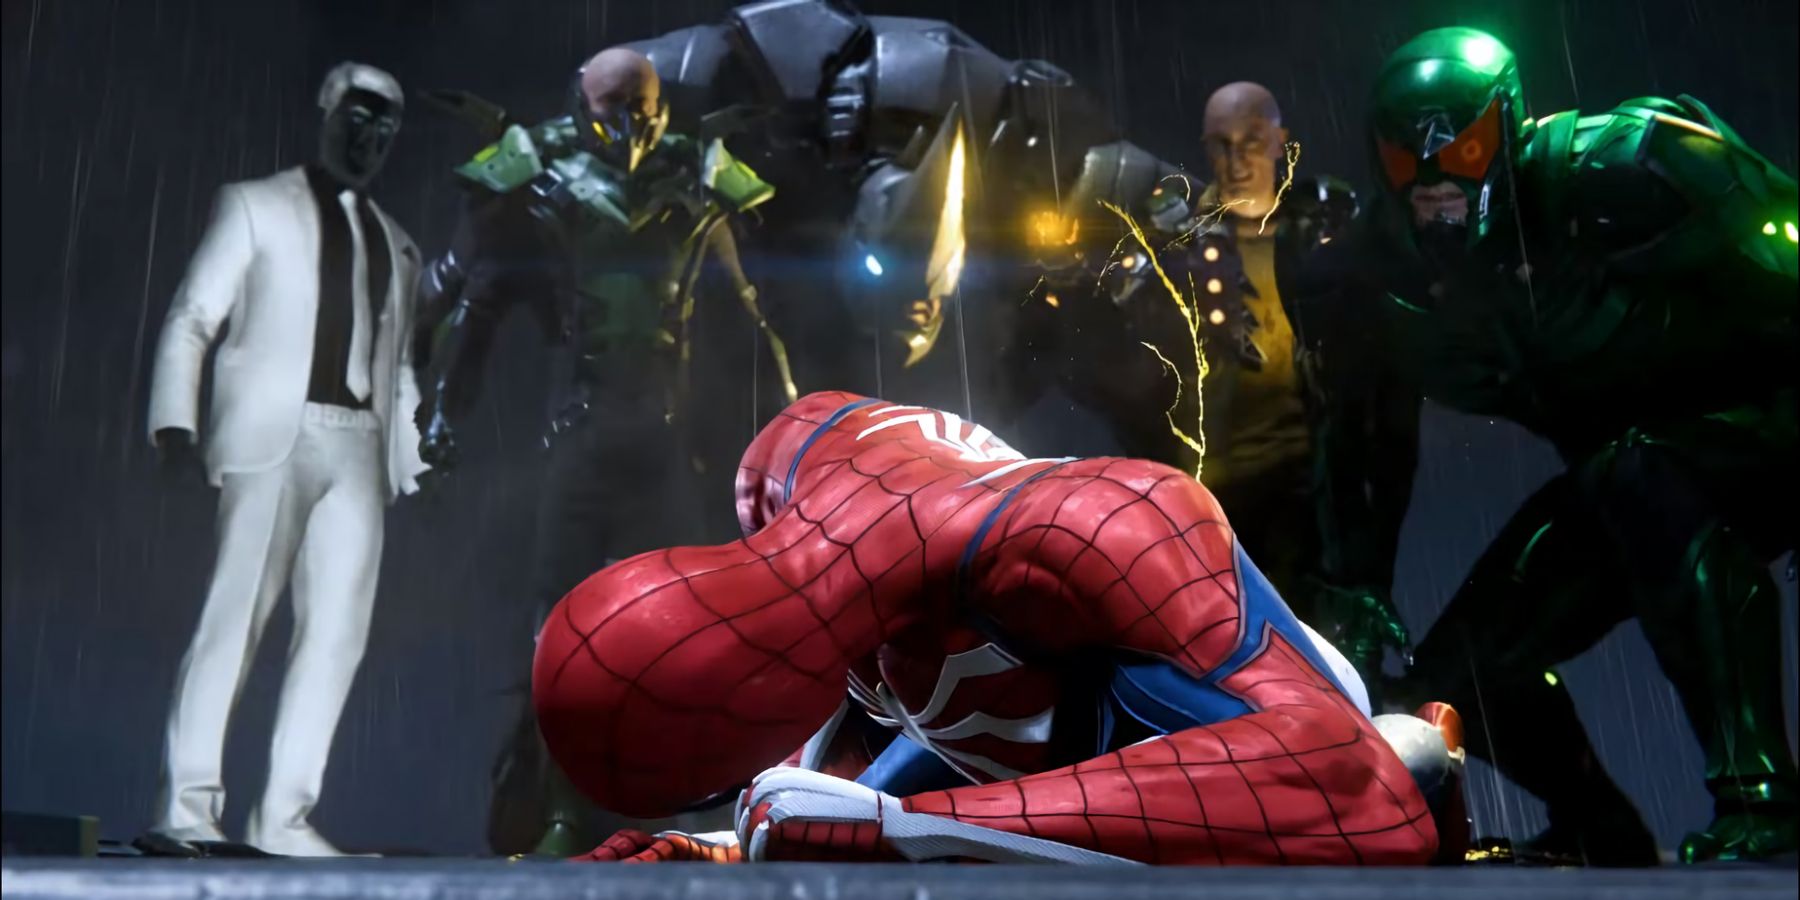 The Sinister Six swarm on Spider-Man